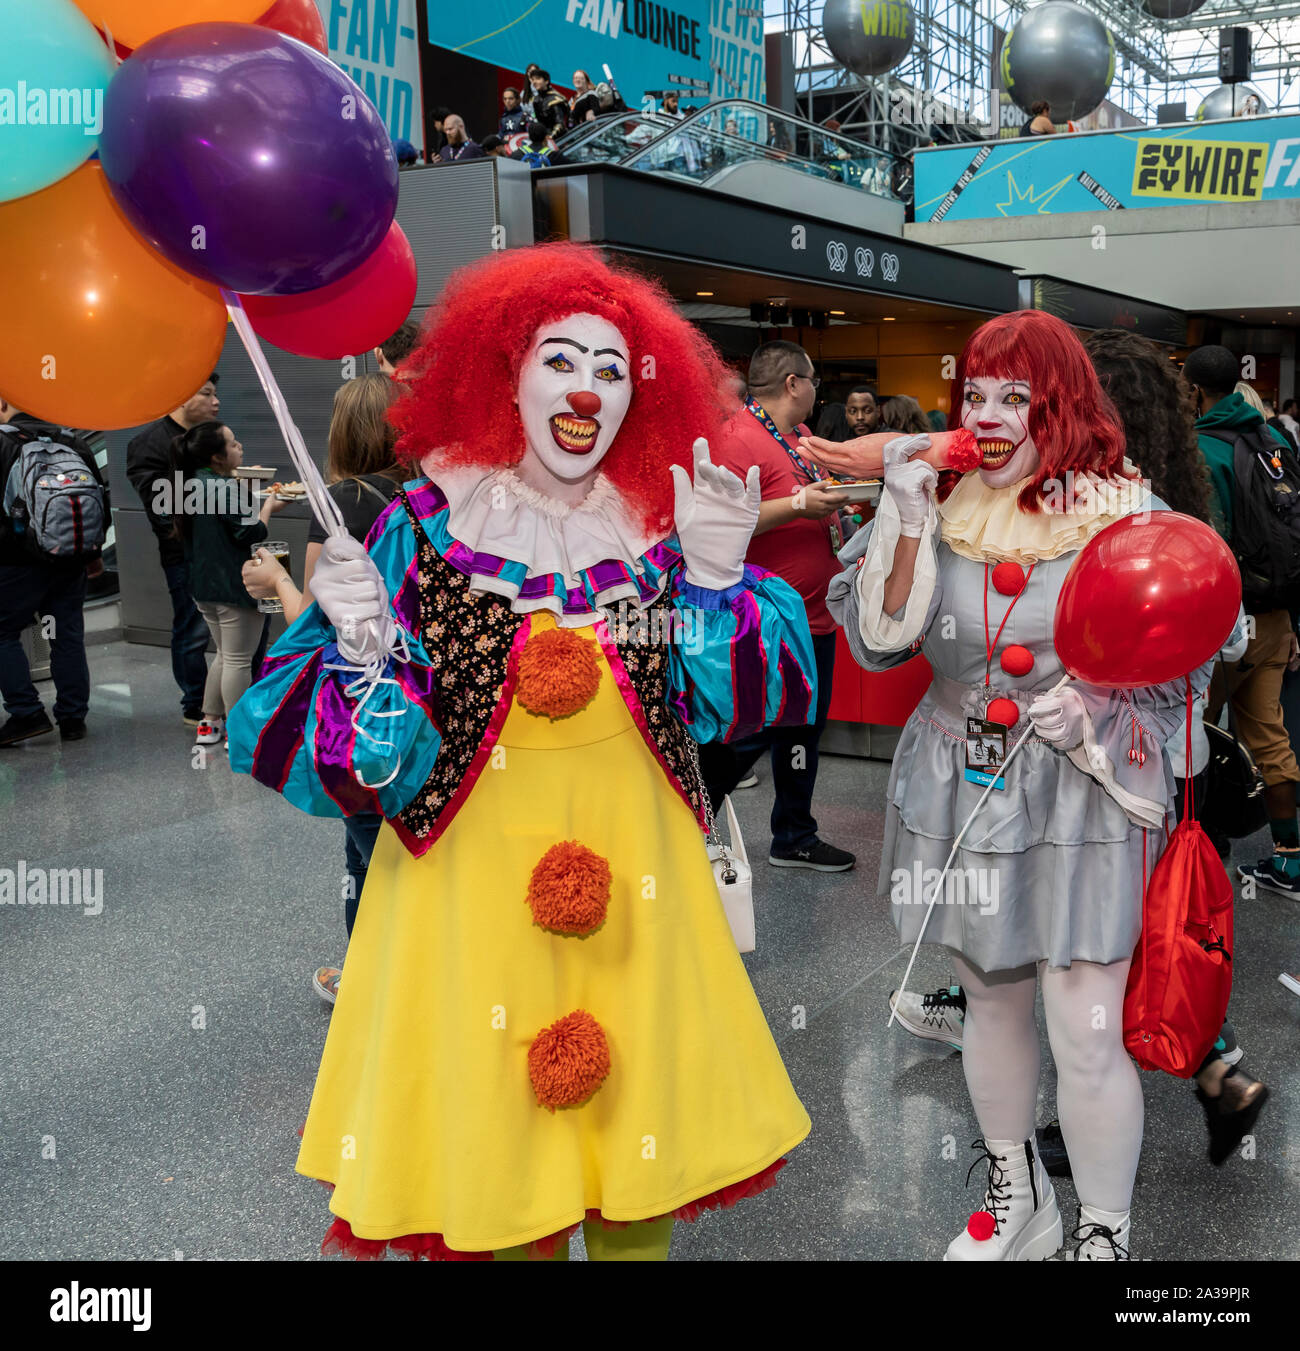 New York Ny Usa October 4 2019 Comic Con Attendees Pose In The